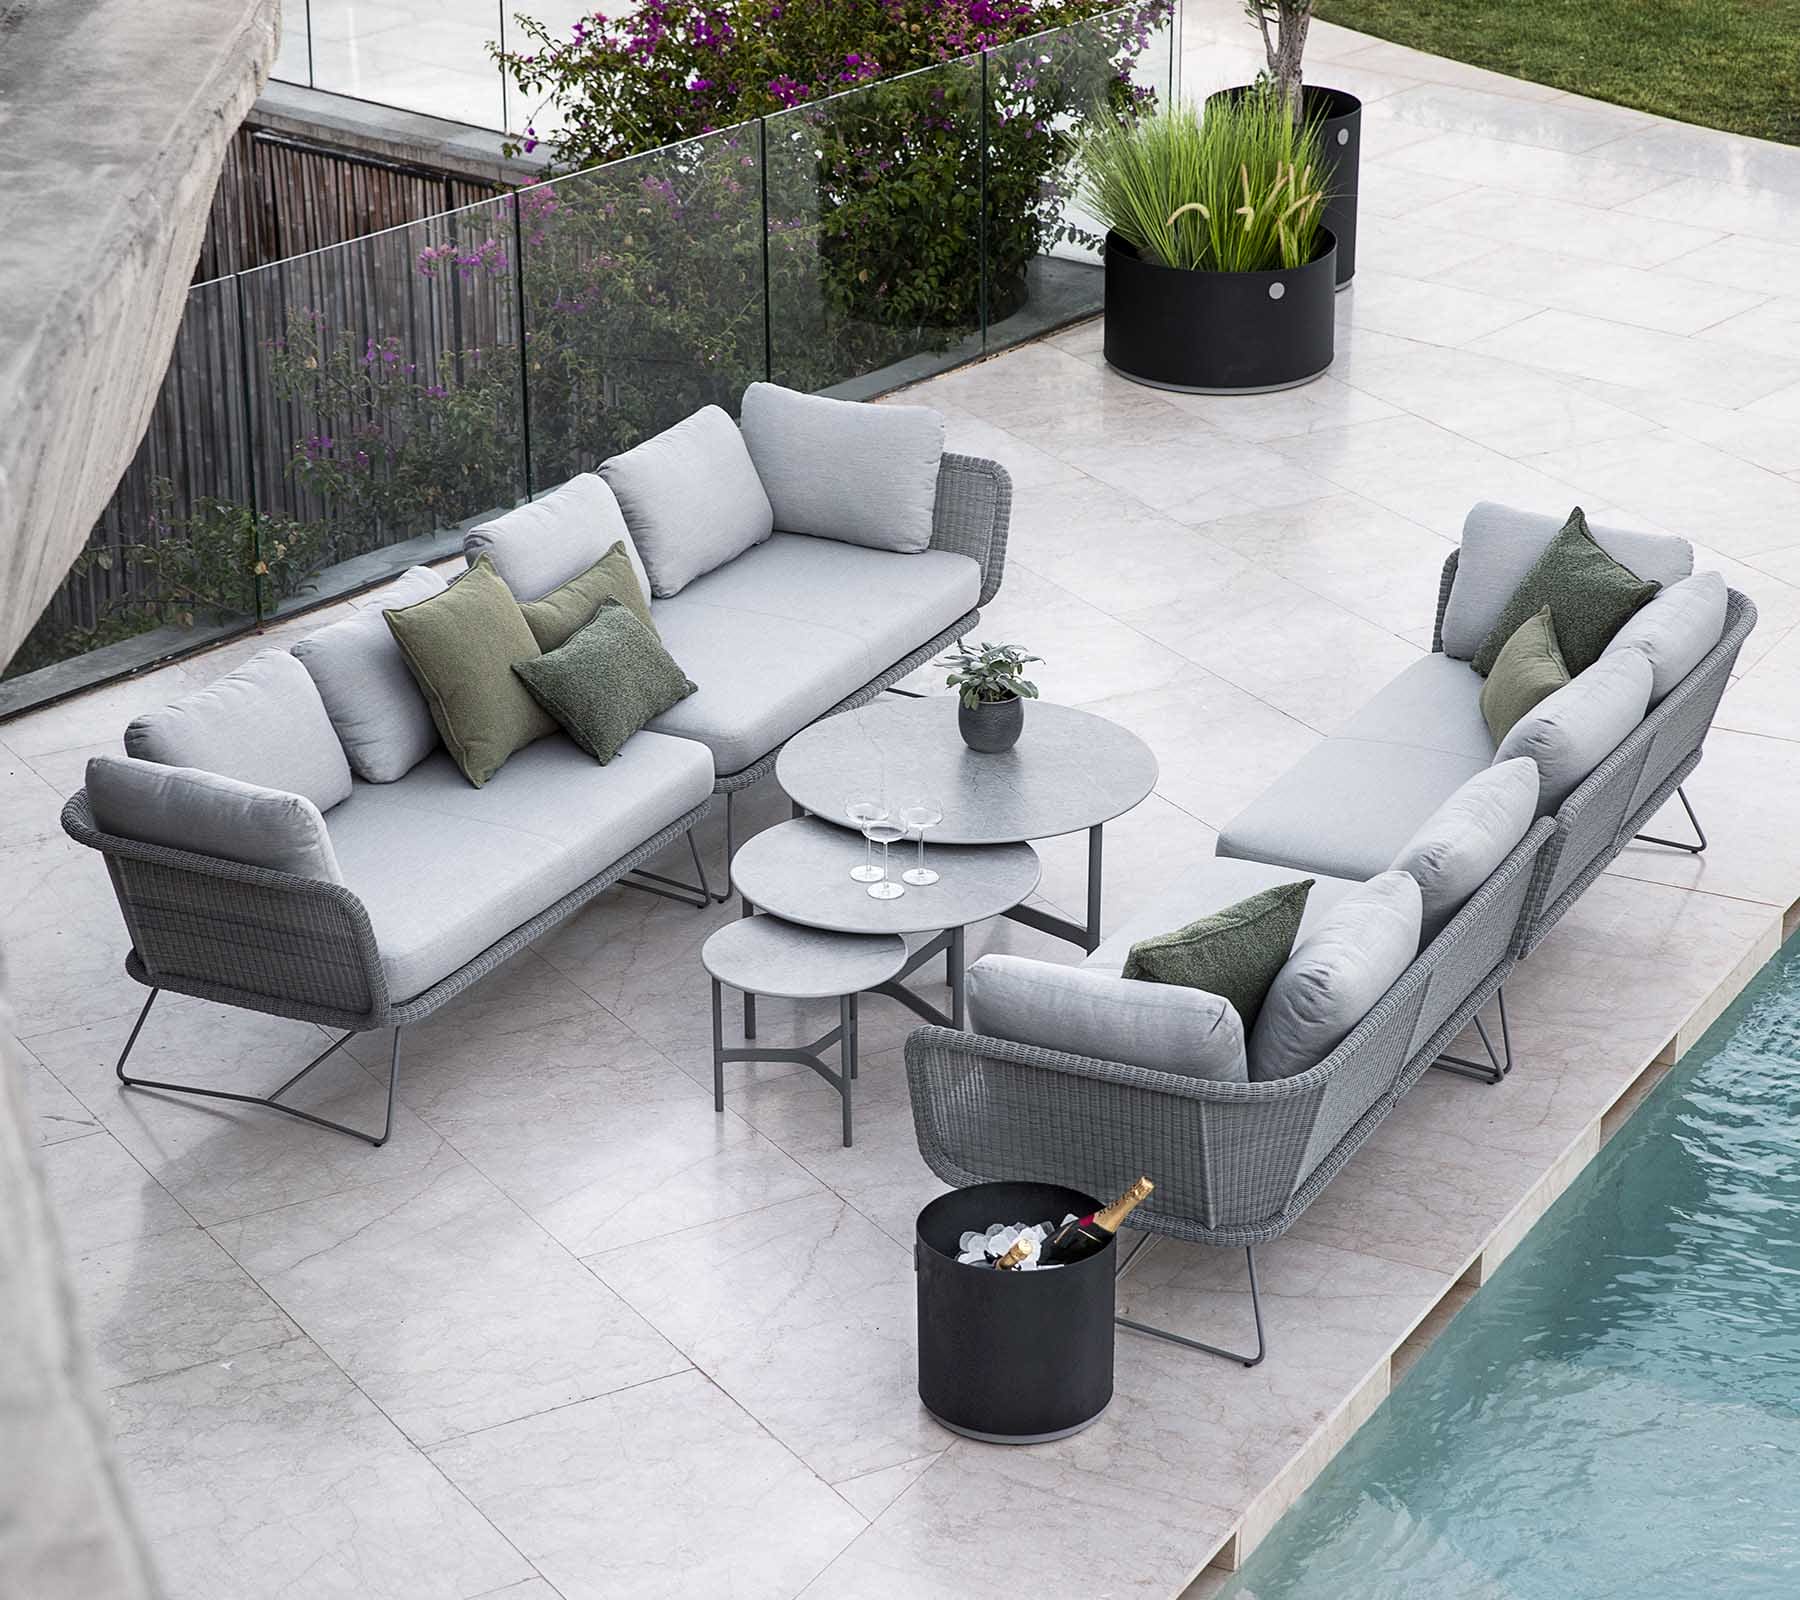 Boxhill's Horizon 2-Seater Outdoor Left Module Sofa lifestyle image together with Horizon 2-Seater Outdoor Right Module Sofa at poolside with 3 different sizes of round table at the center